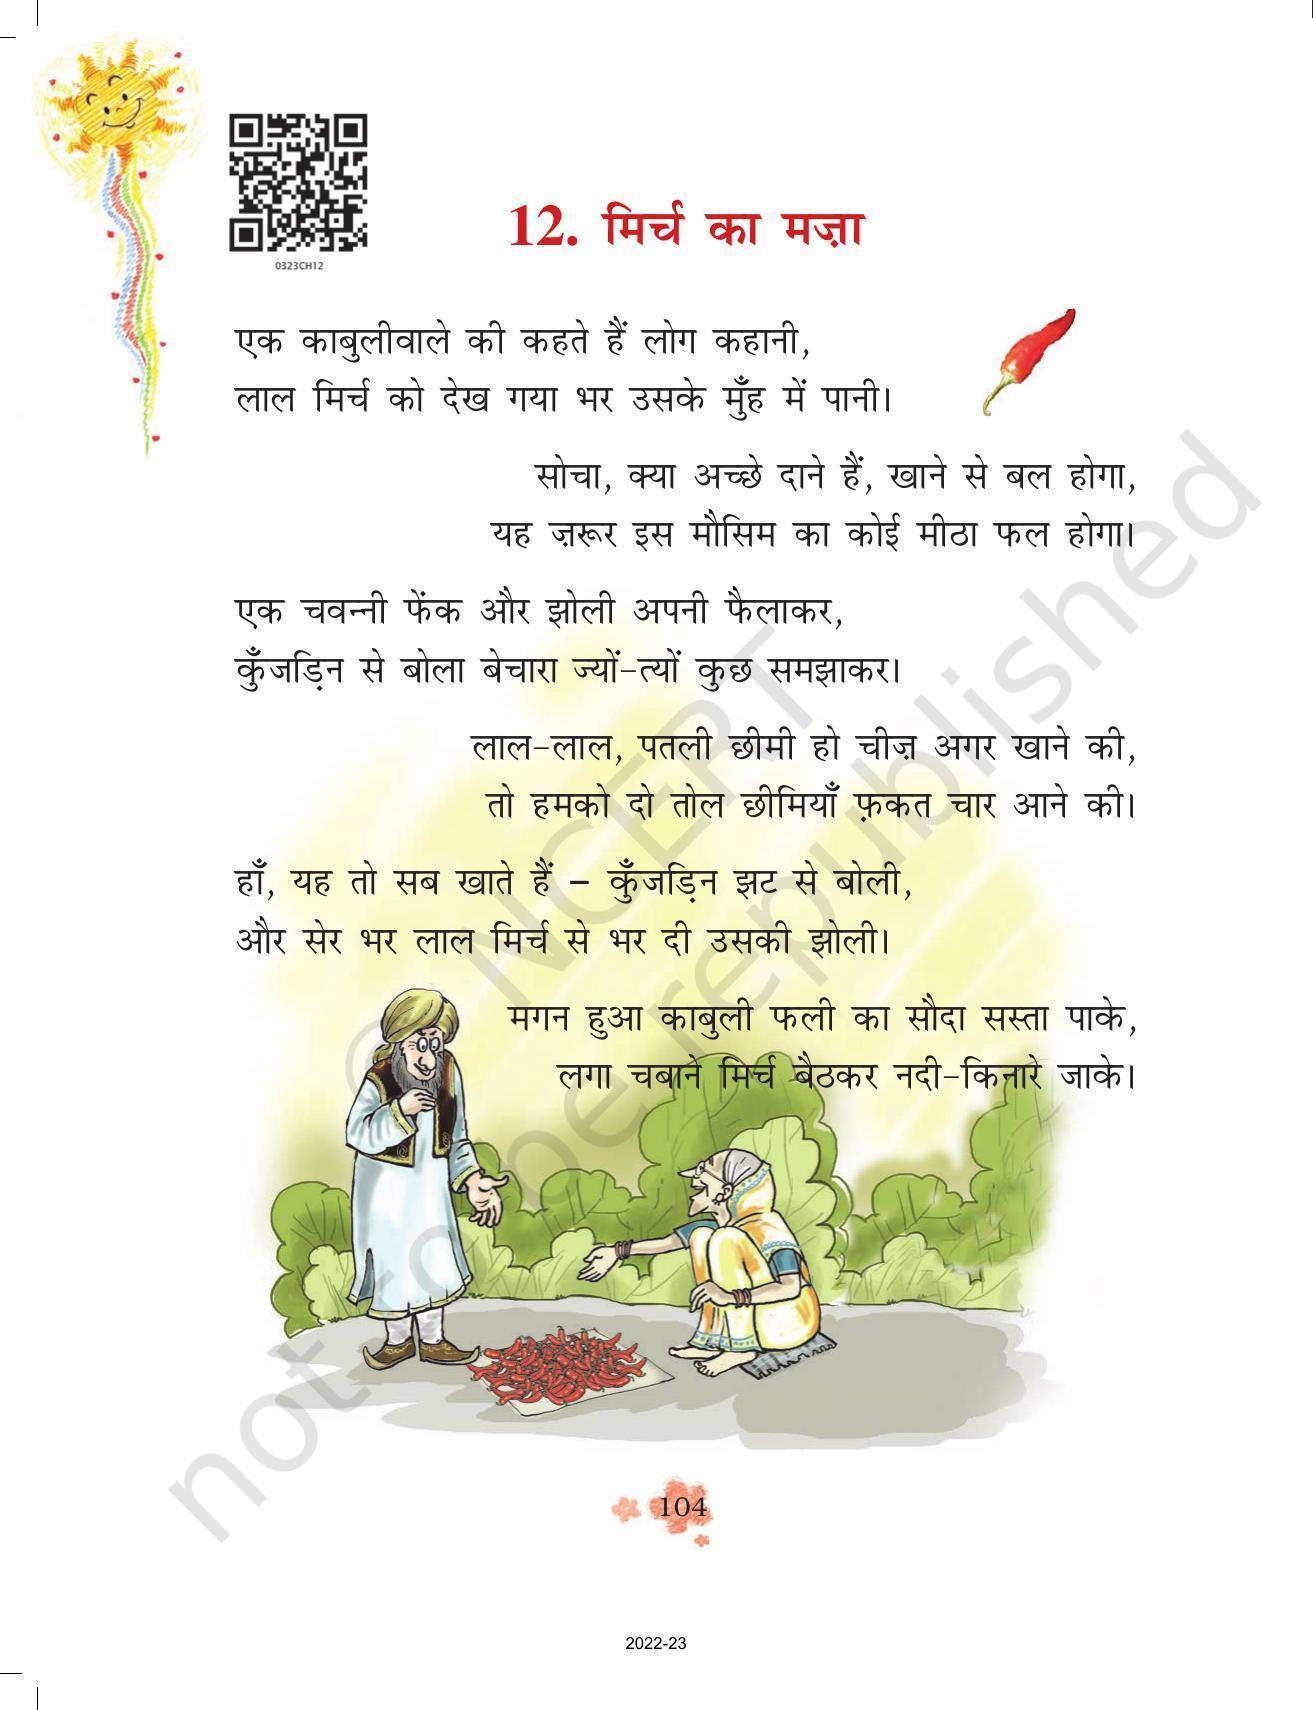 NCERT Book for Class 3 Hindi Chapter 12-मिर्च का मजा - Page 1